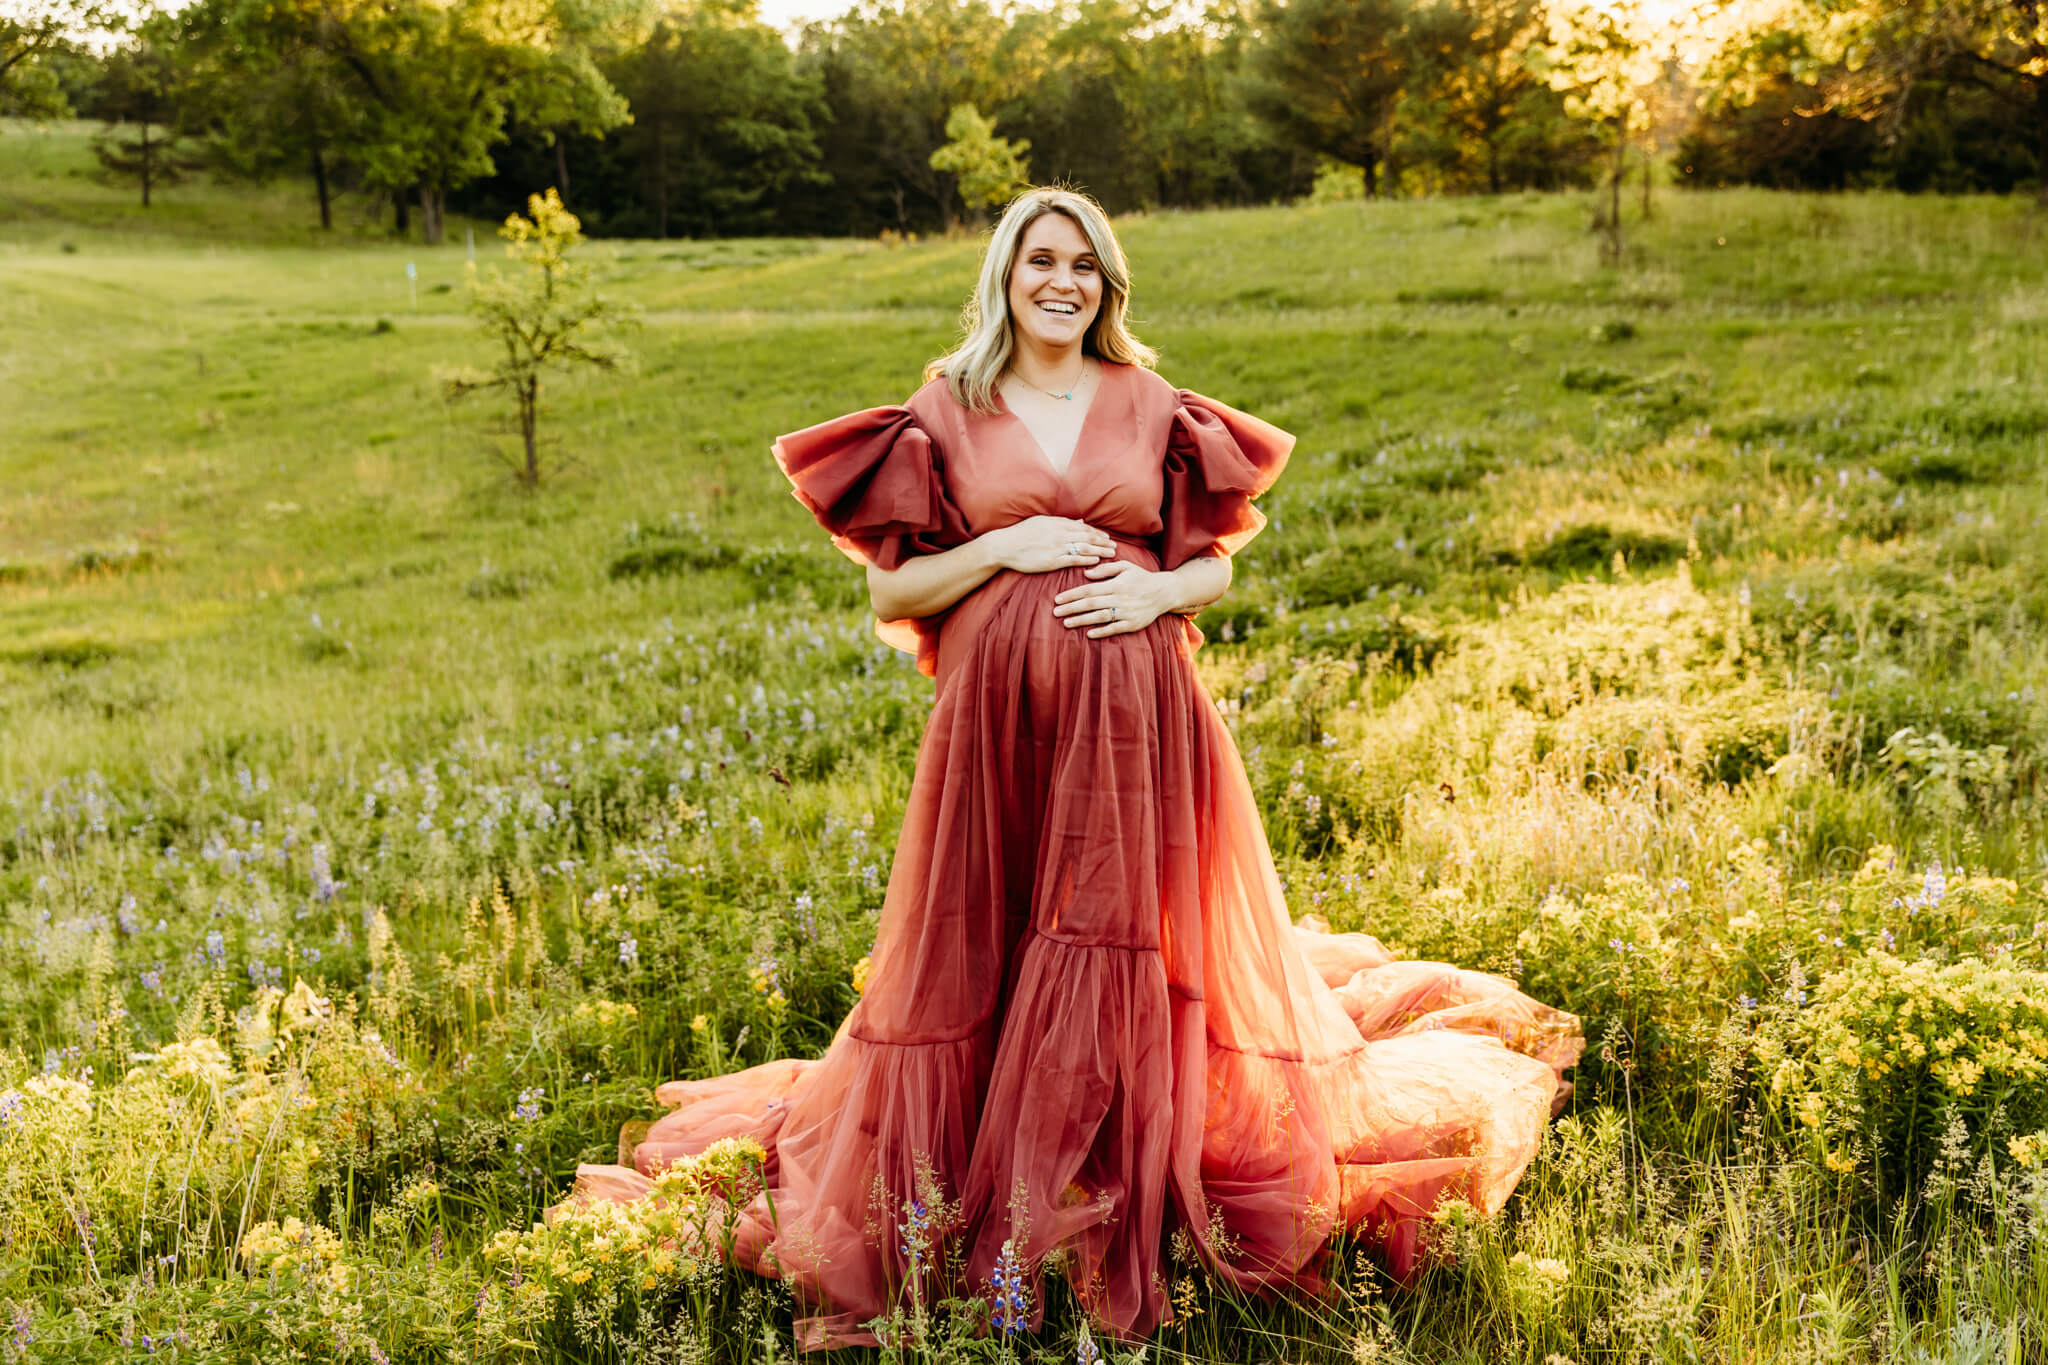 stunning mom to be posing while resting her hands on her baby bump in a spring flower field